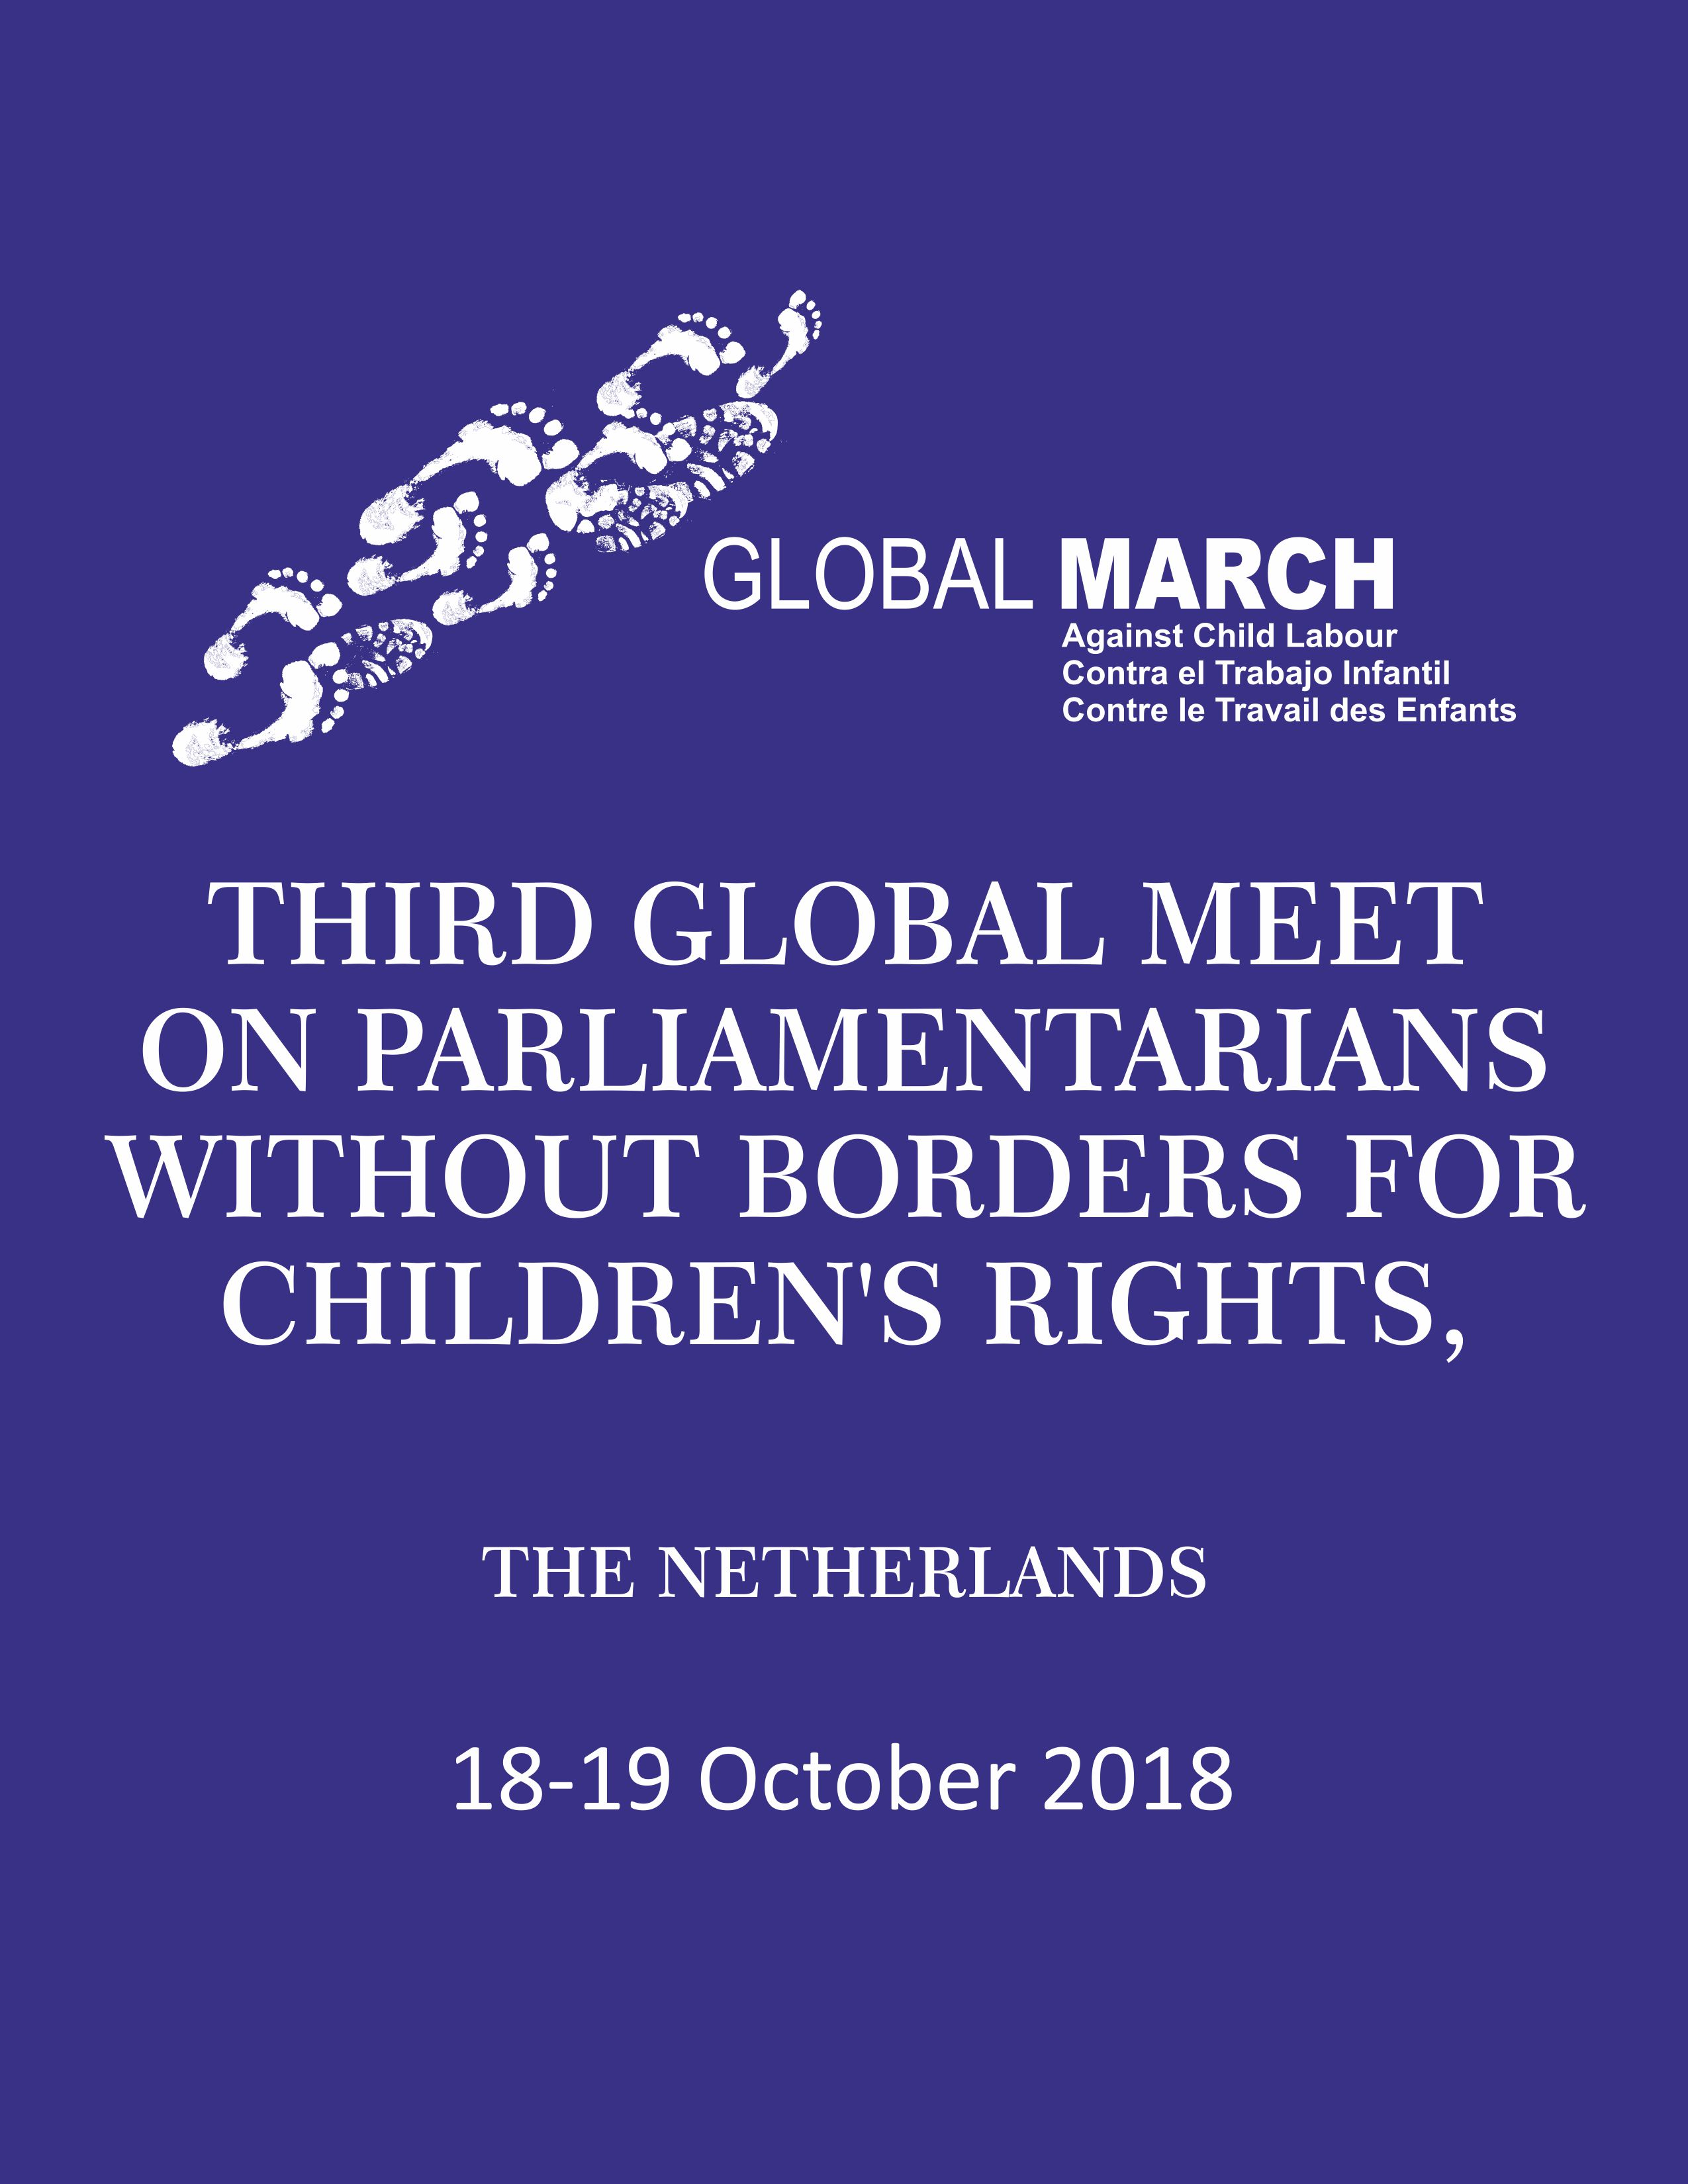 Third Global Meet on PWB, The Netherlands